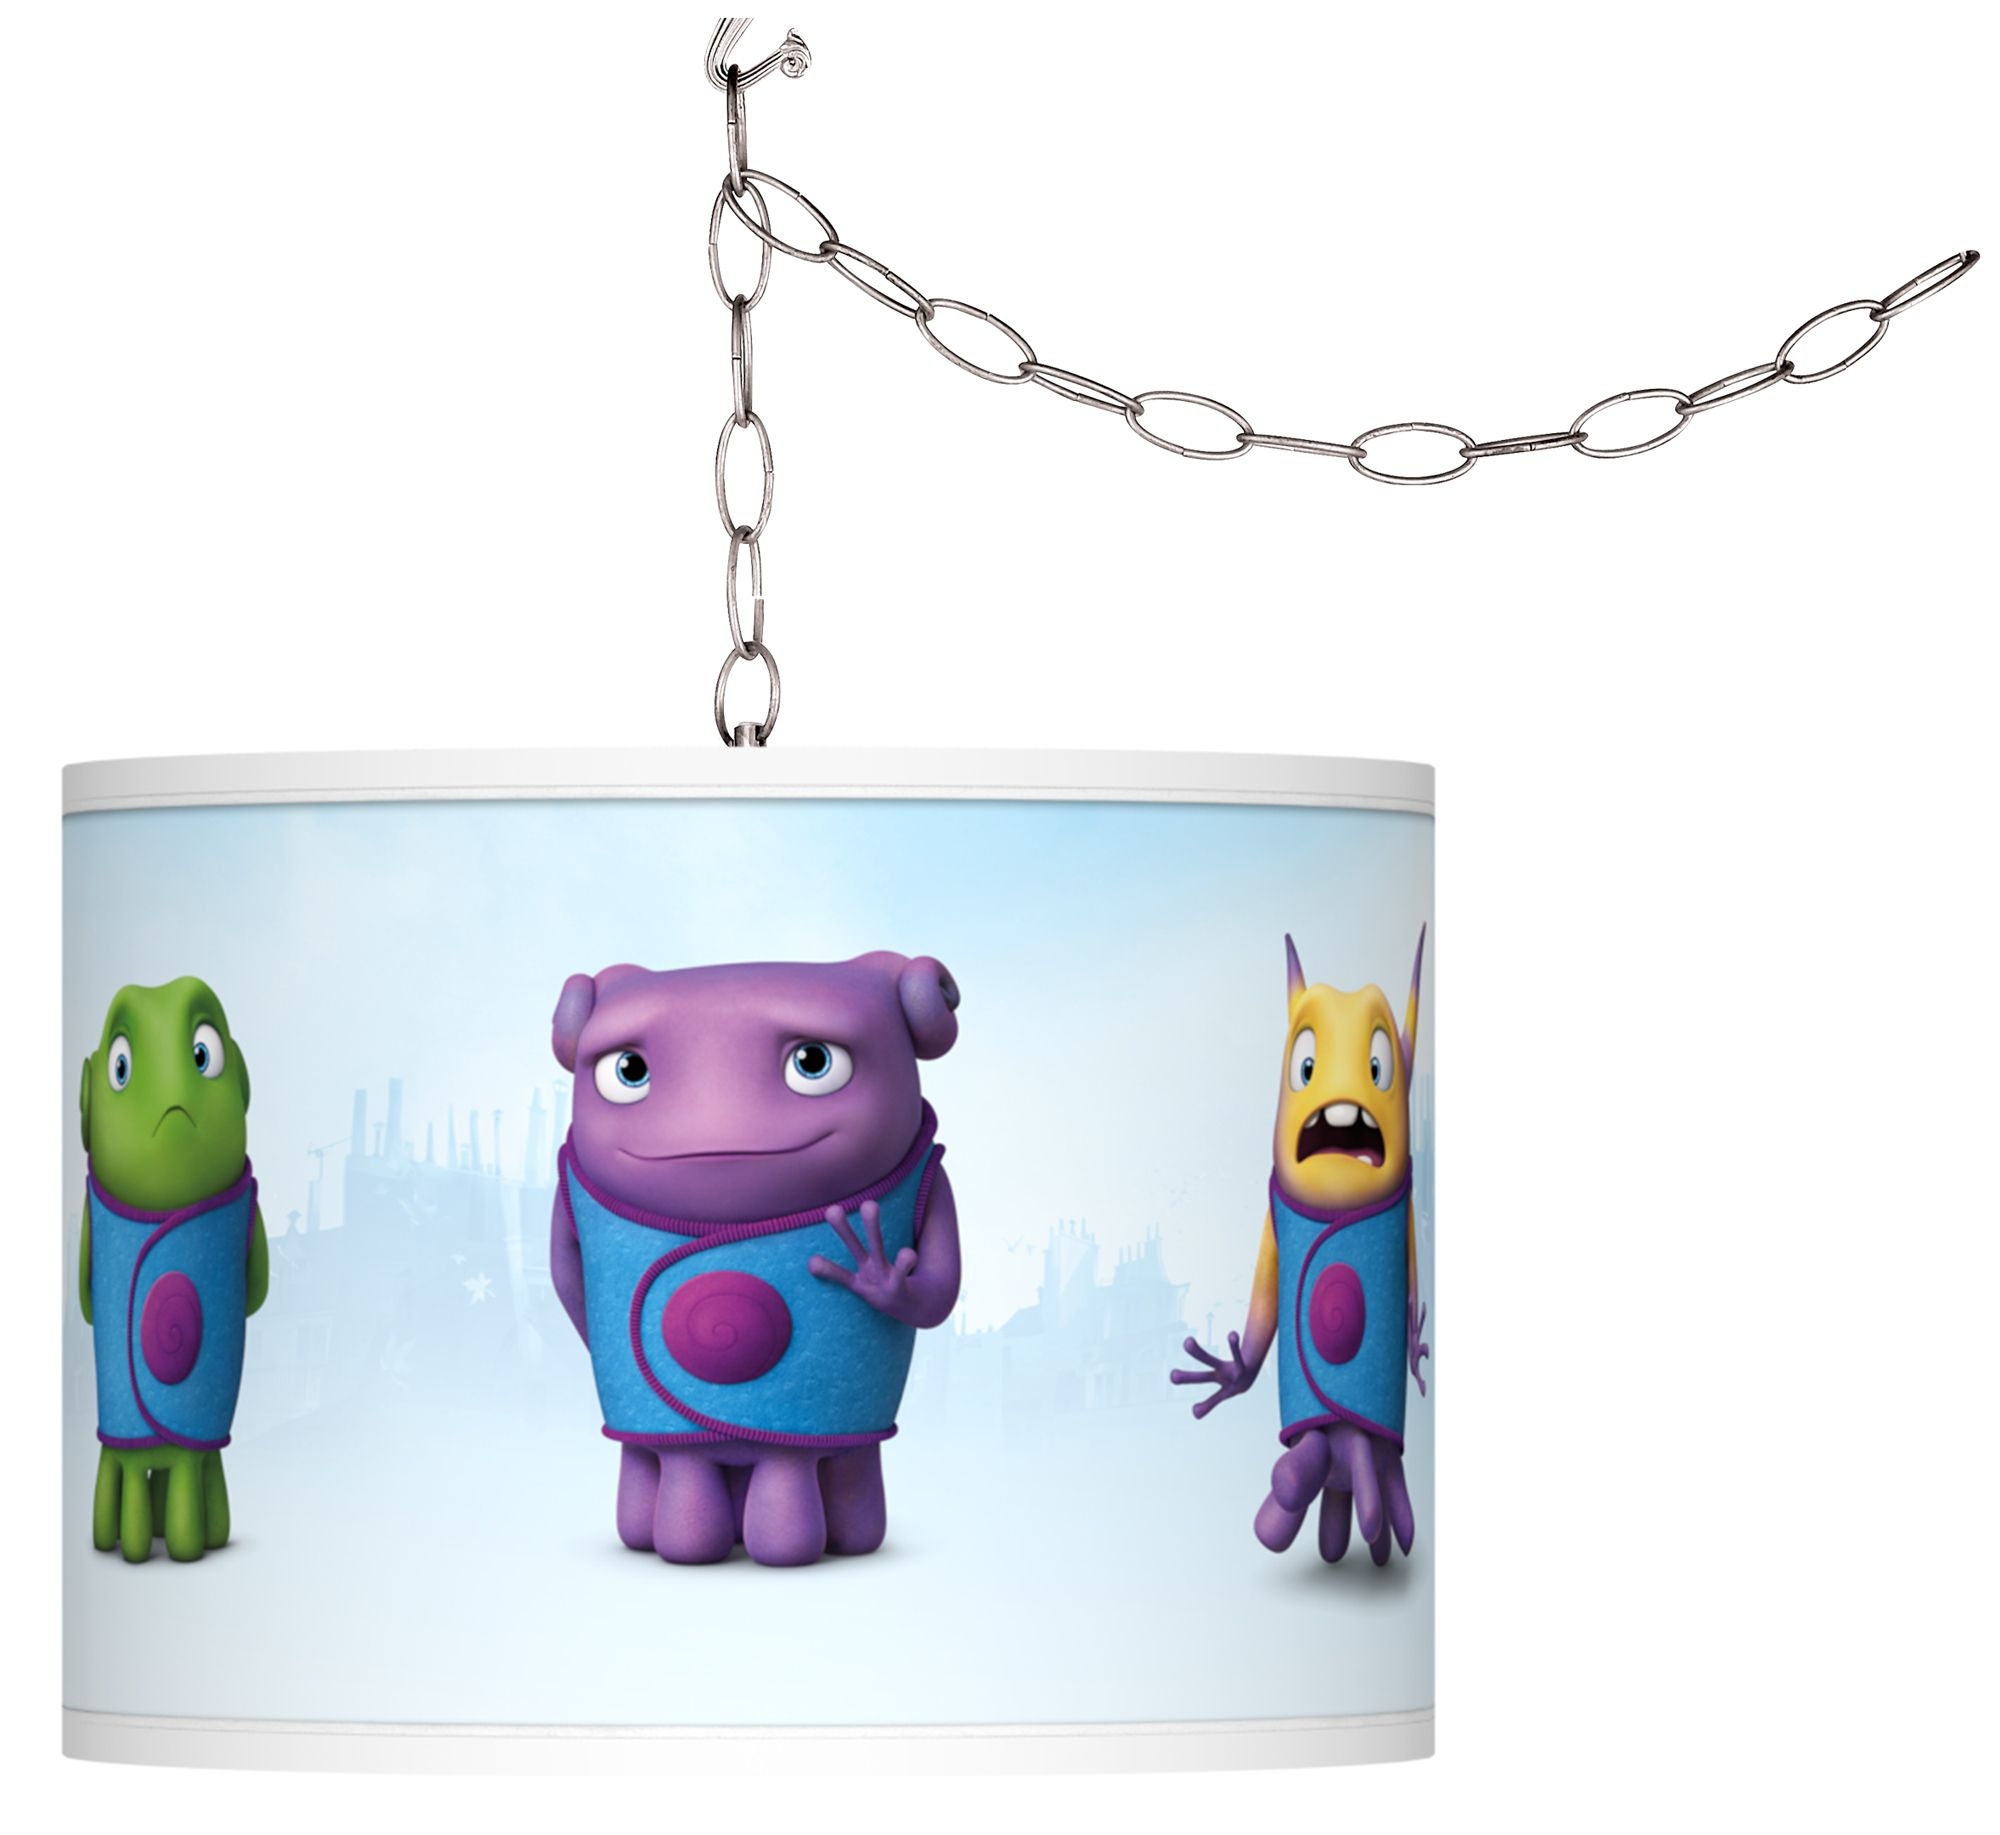 Officially Licensed Swag Lamp